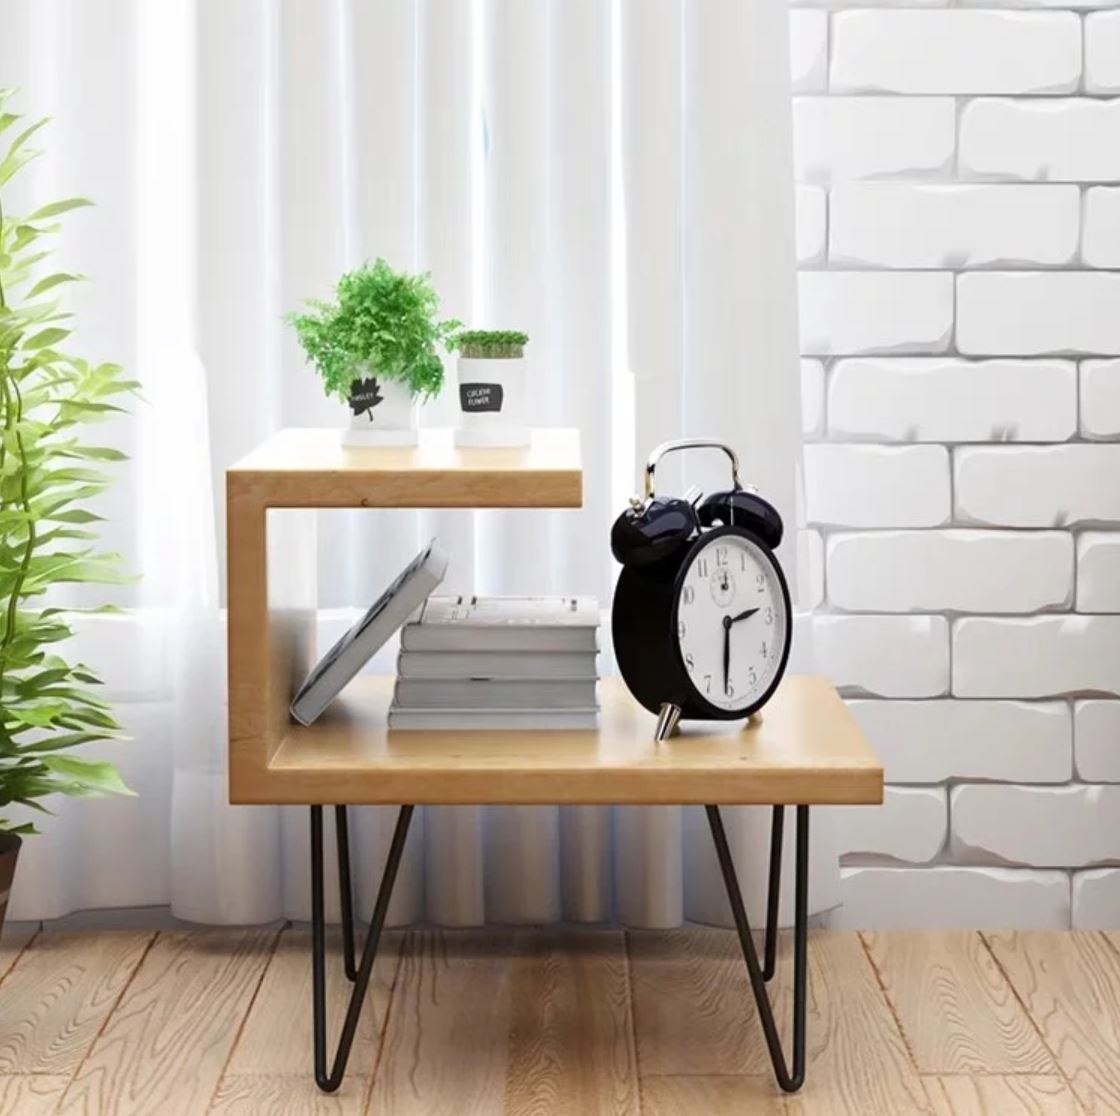 WAREHOUSE SALE ARIEL Modern Industrial Solid Wood Bedside Table ( Special Price $99 )